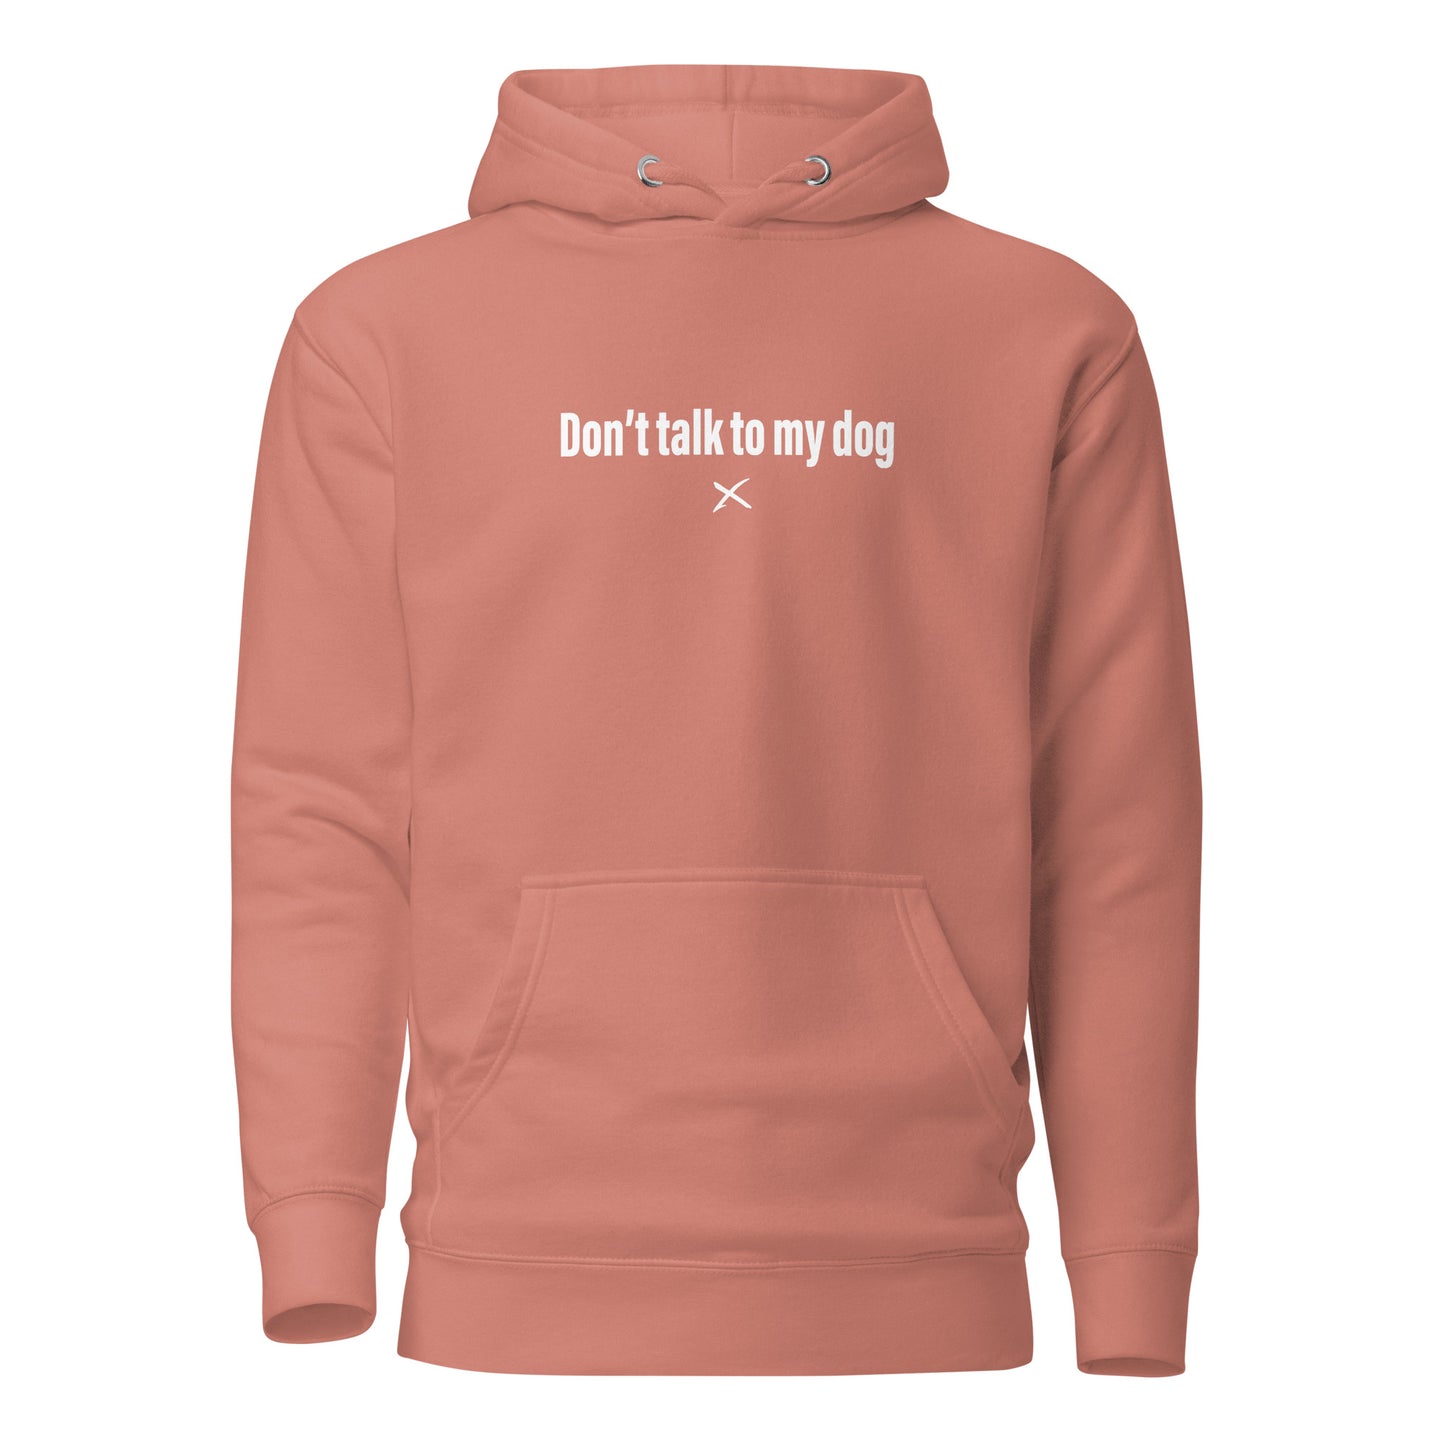 Don't talk to my dog - Hoodie